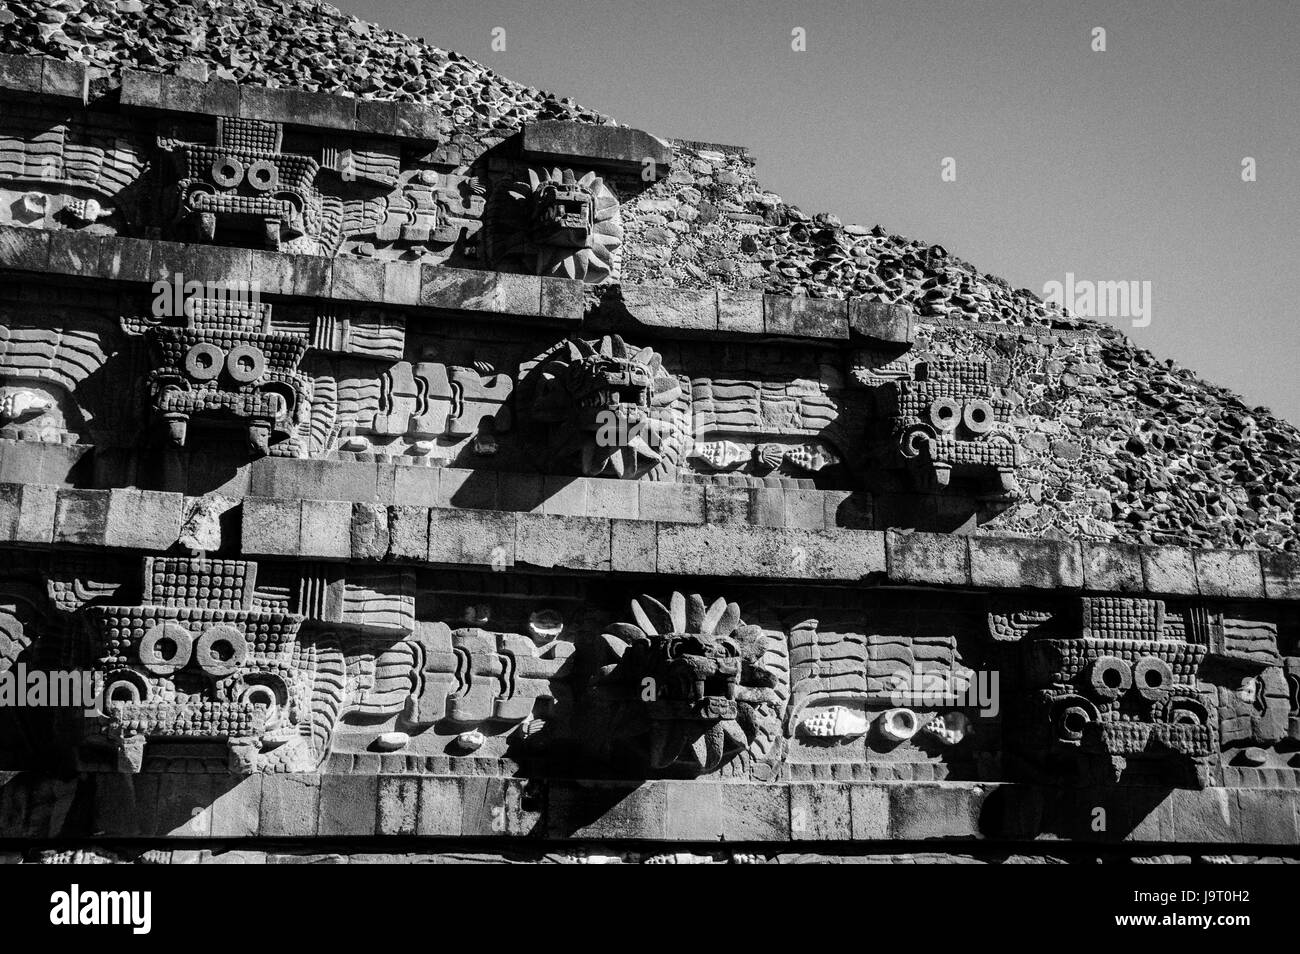 Teotihuacan, A UNESCO World Heritage Site, in Mexiko Stockfoto